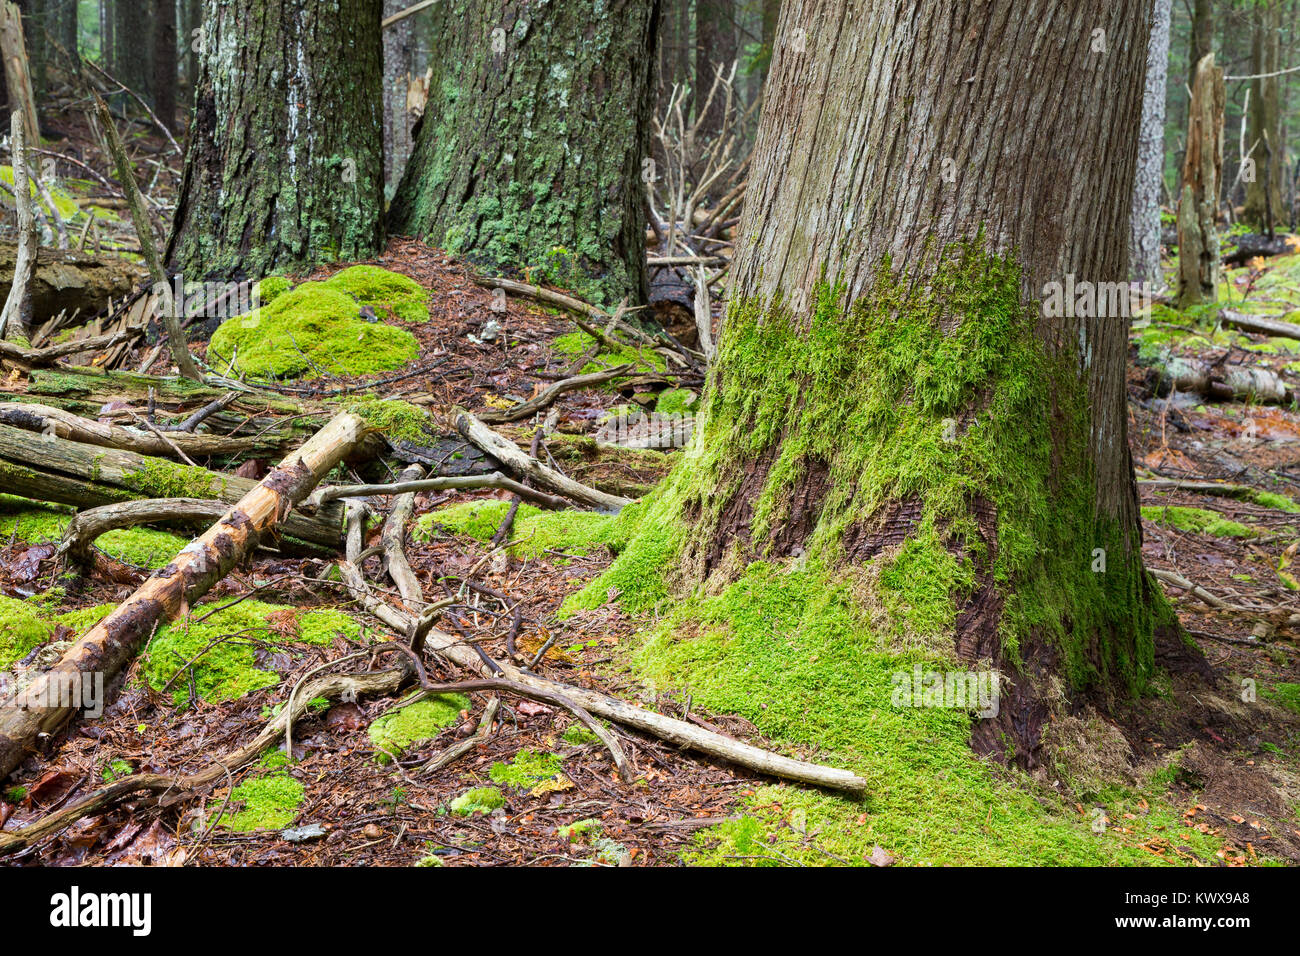 Moss growing on the forest floor and tree trunks along the Otter Cove Trail. Acadia National Park, Maine Stock Photo